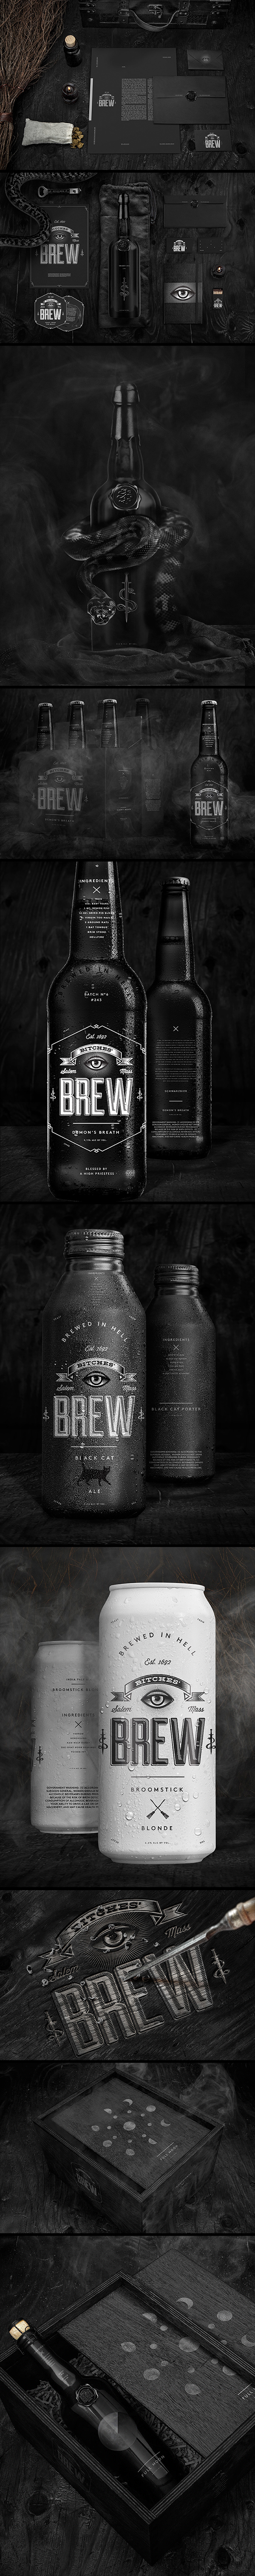 inspirations graphiques identity Wedge & Lever | Bitches brew